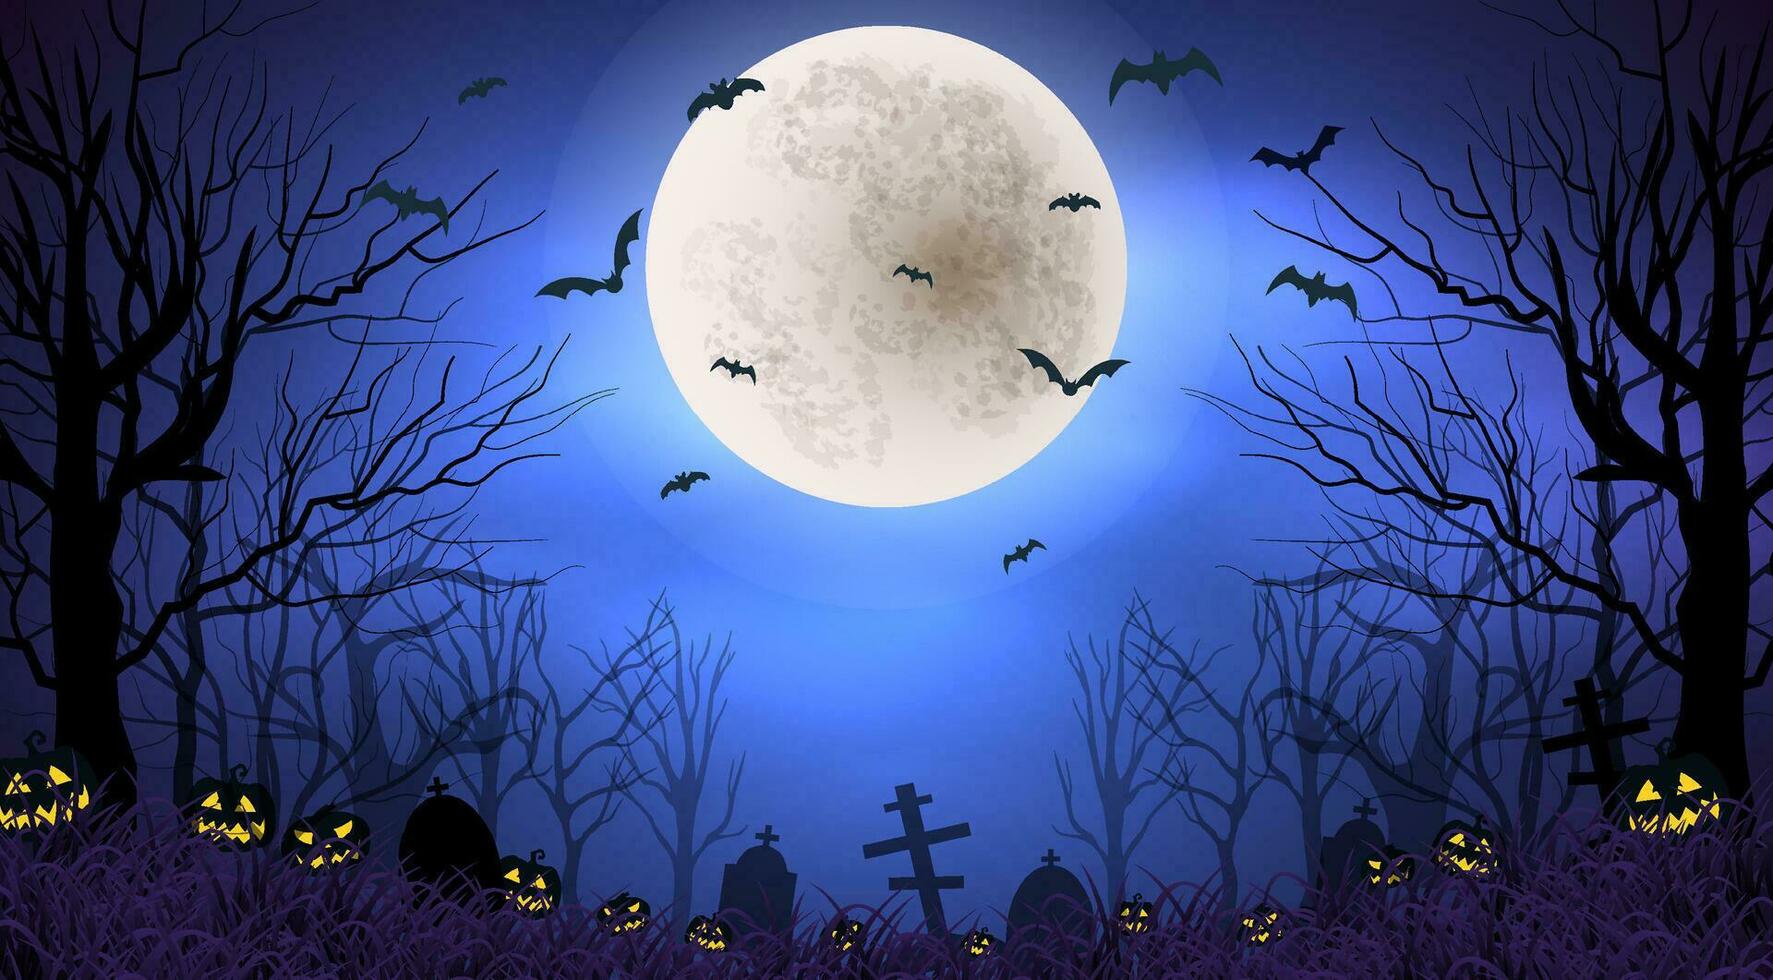 Halloween spooky background illustration with old cemetery night and a full moon with flying bats vector